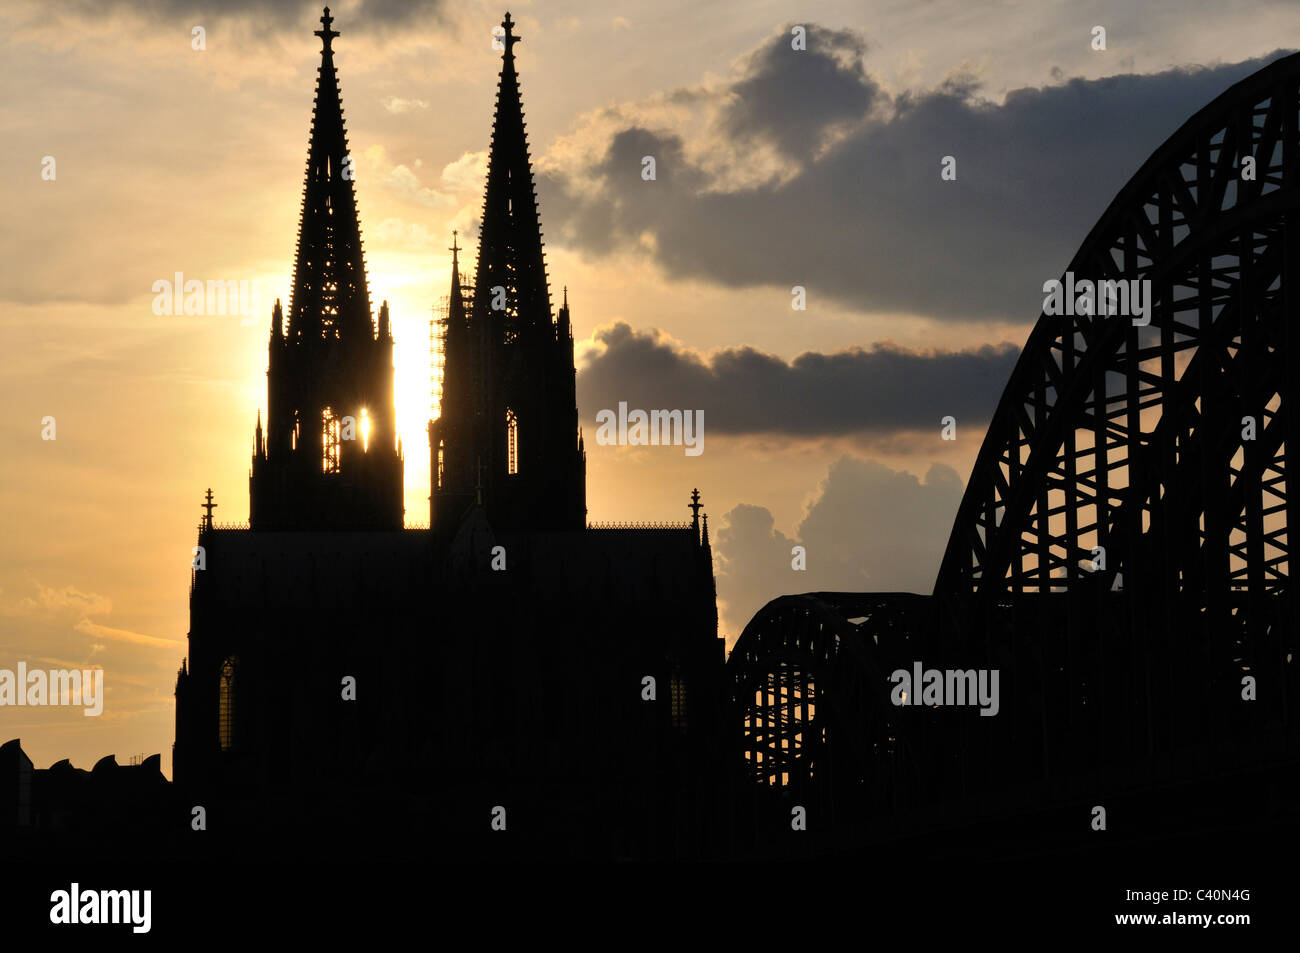 Dusk, evening mood, Christianity, Germany, cathedral, dome, Europe, cathedral, religion, UNESCO, world cultural heritage Stock Photo